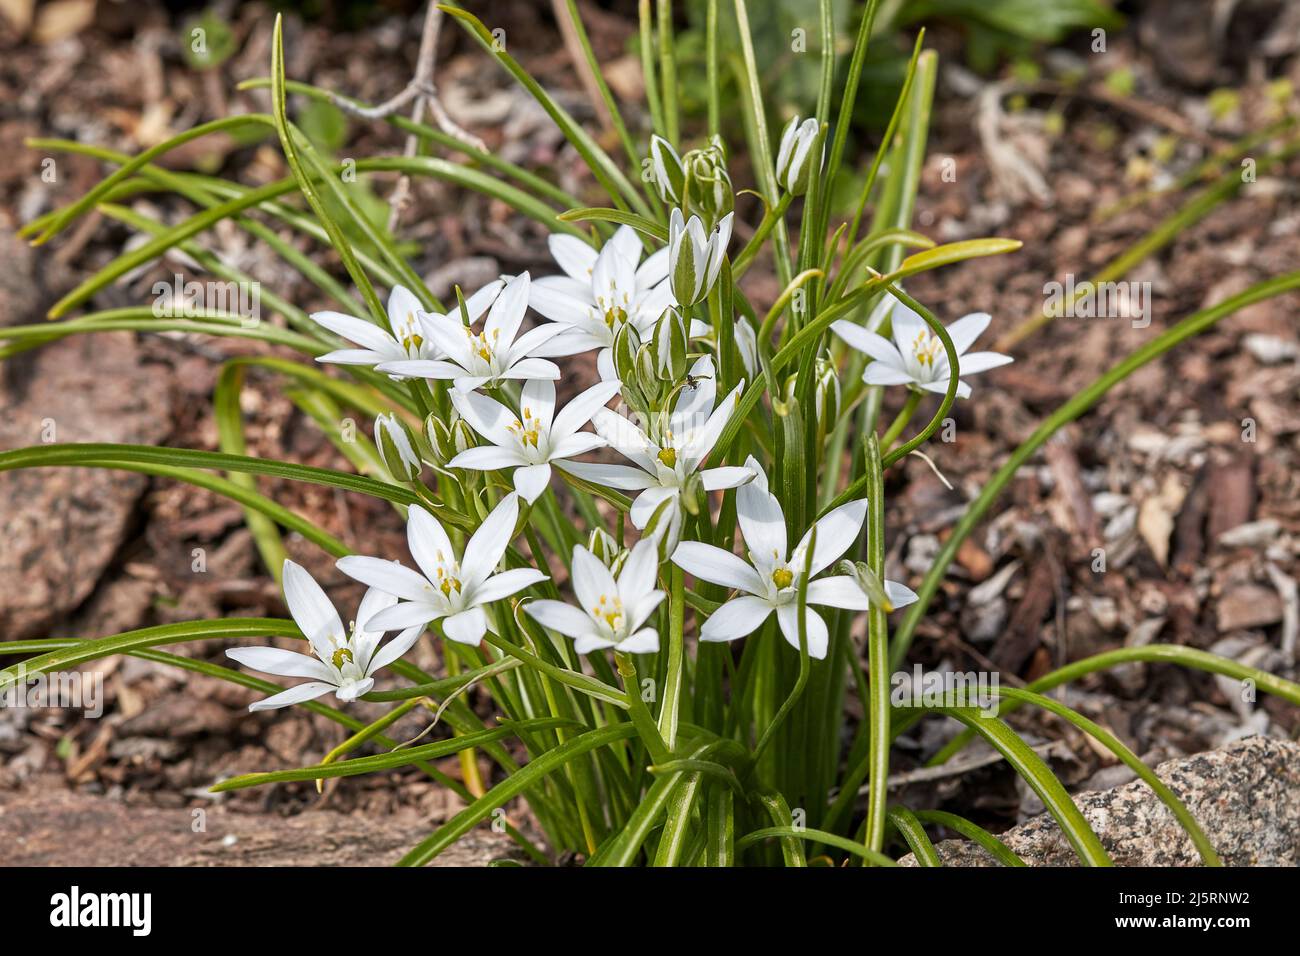 Umbellate Milky Star, Latin Ornithogalum umbellatum, with white star-shaped flowers and grass-like green leaves, also called the Star of Bethlehem Stock Photo